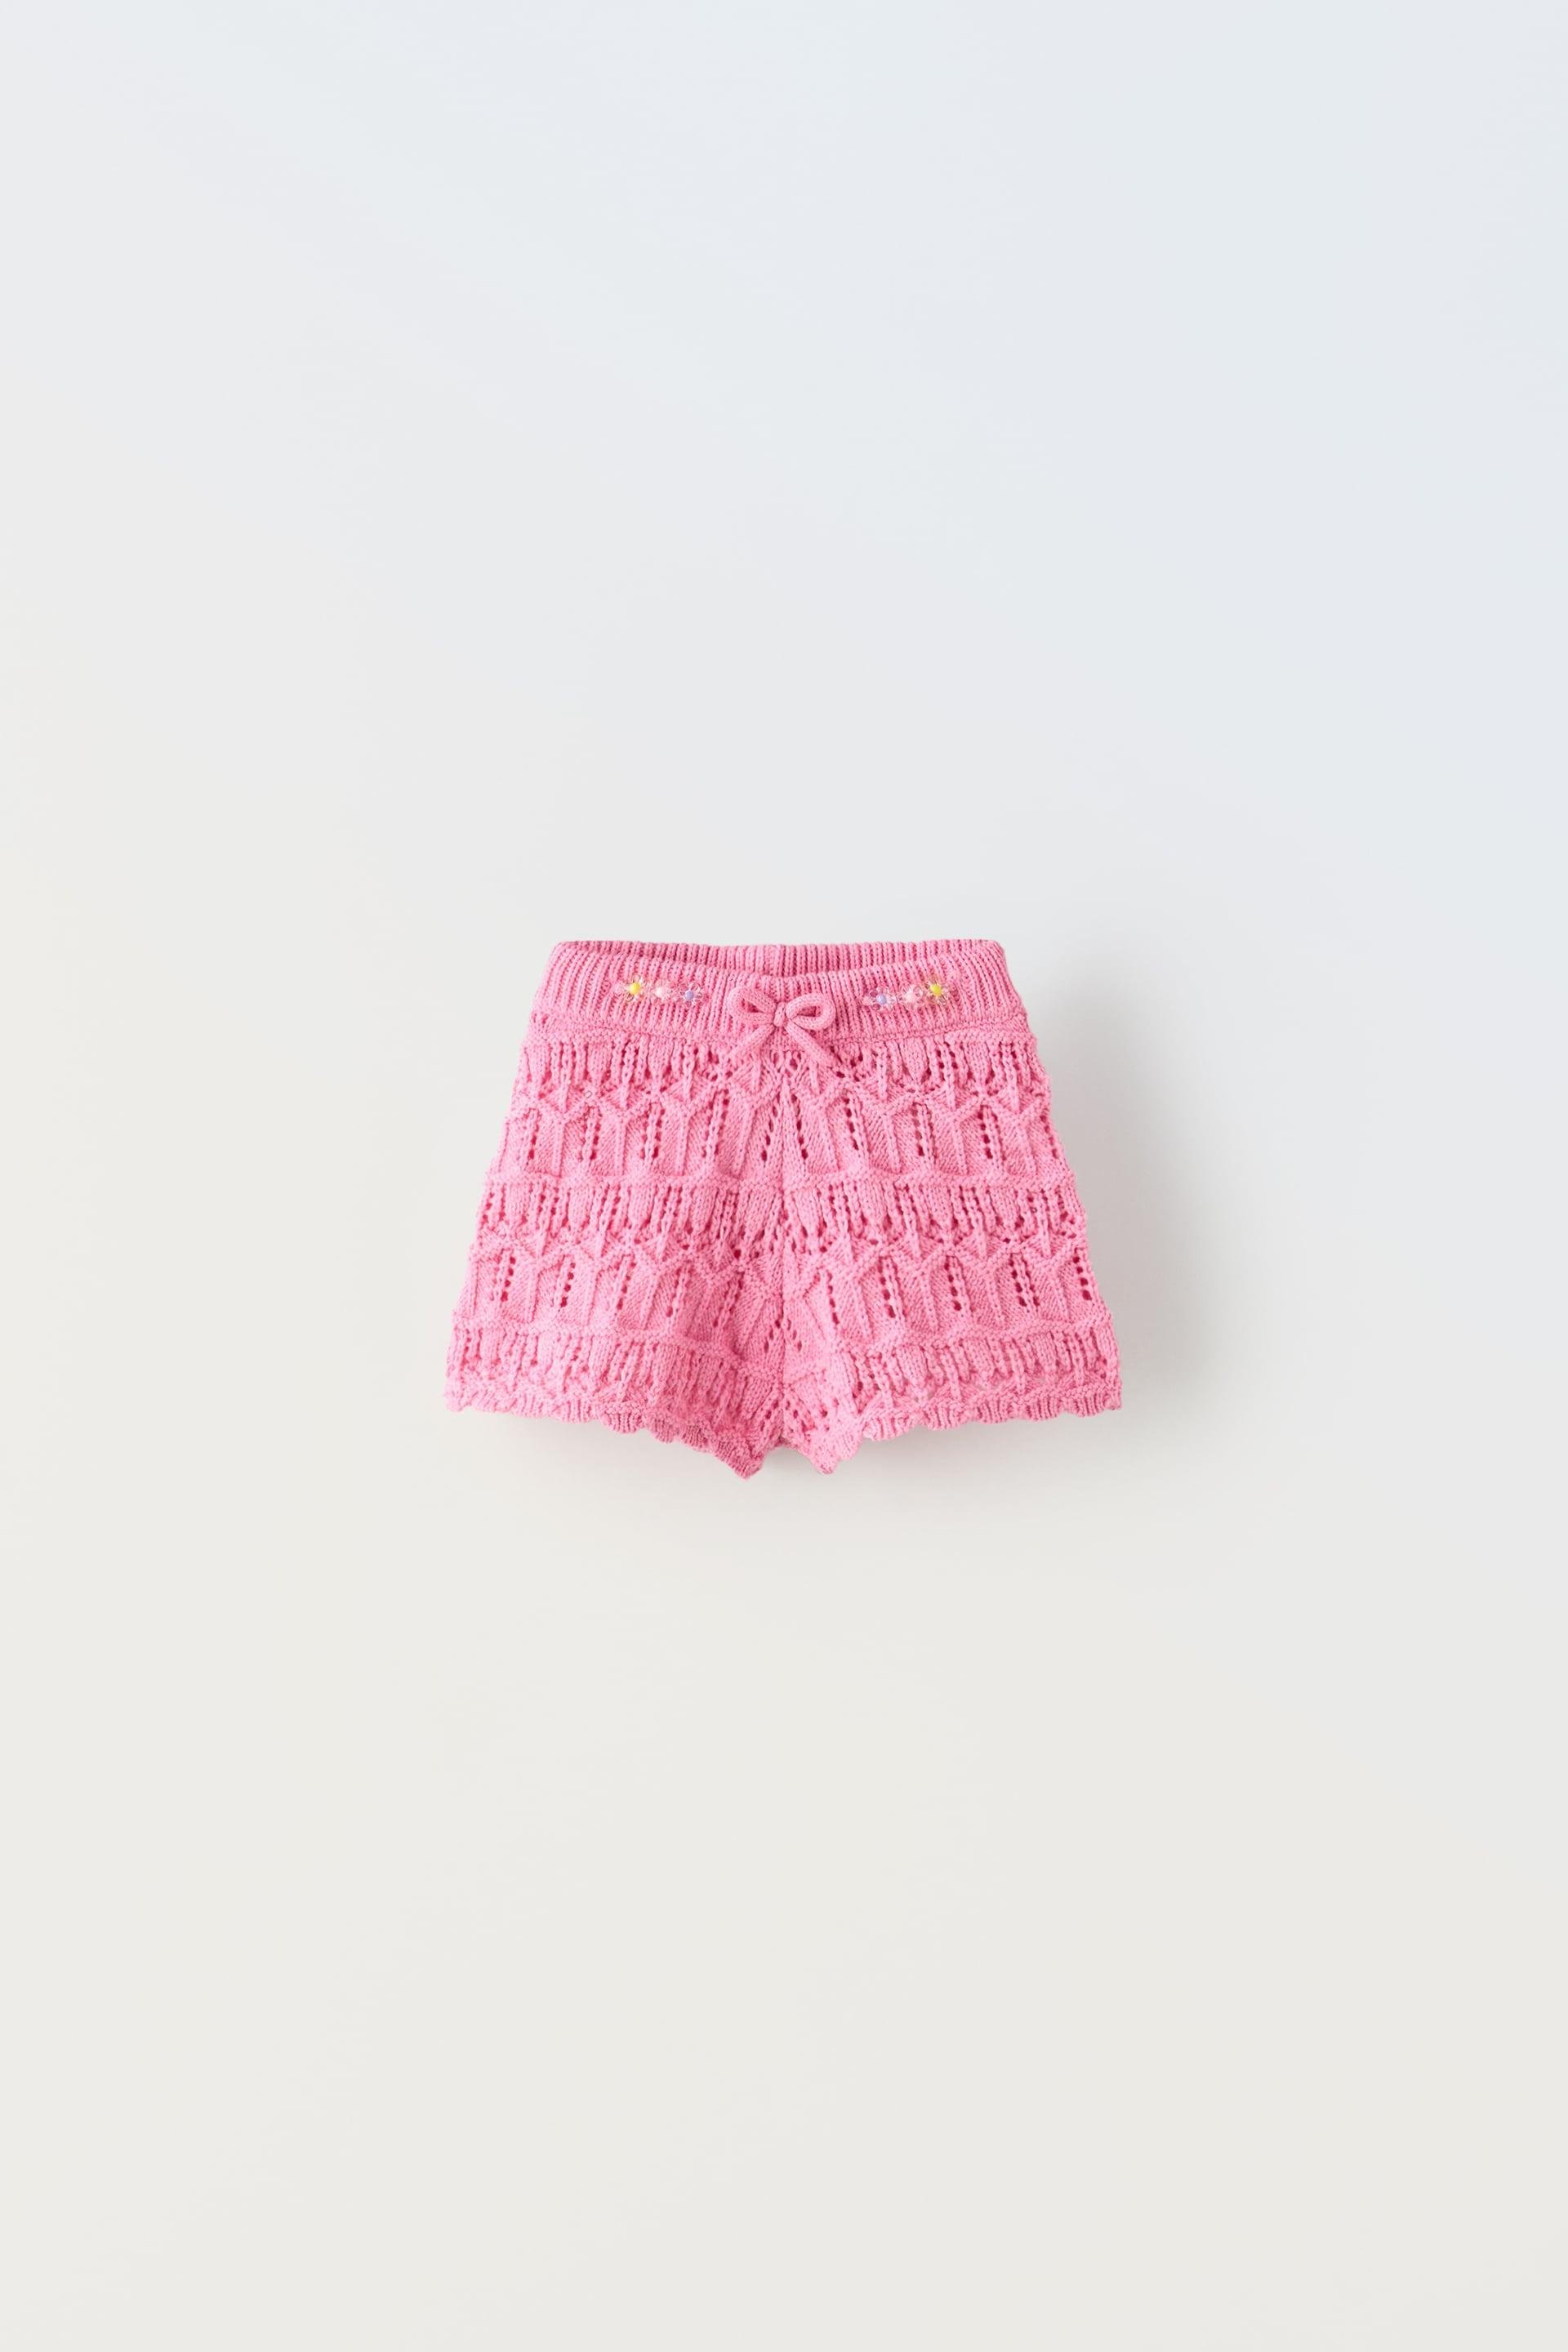 FLORAL BEADED KNIT SHORTS by ZARA